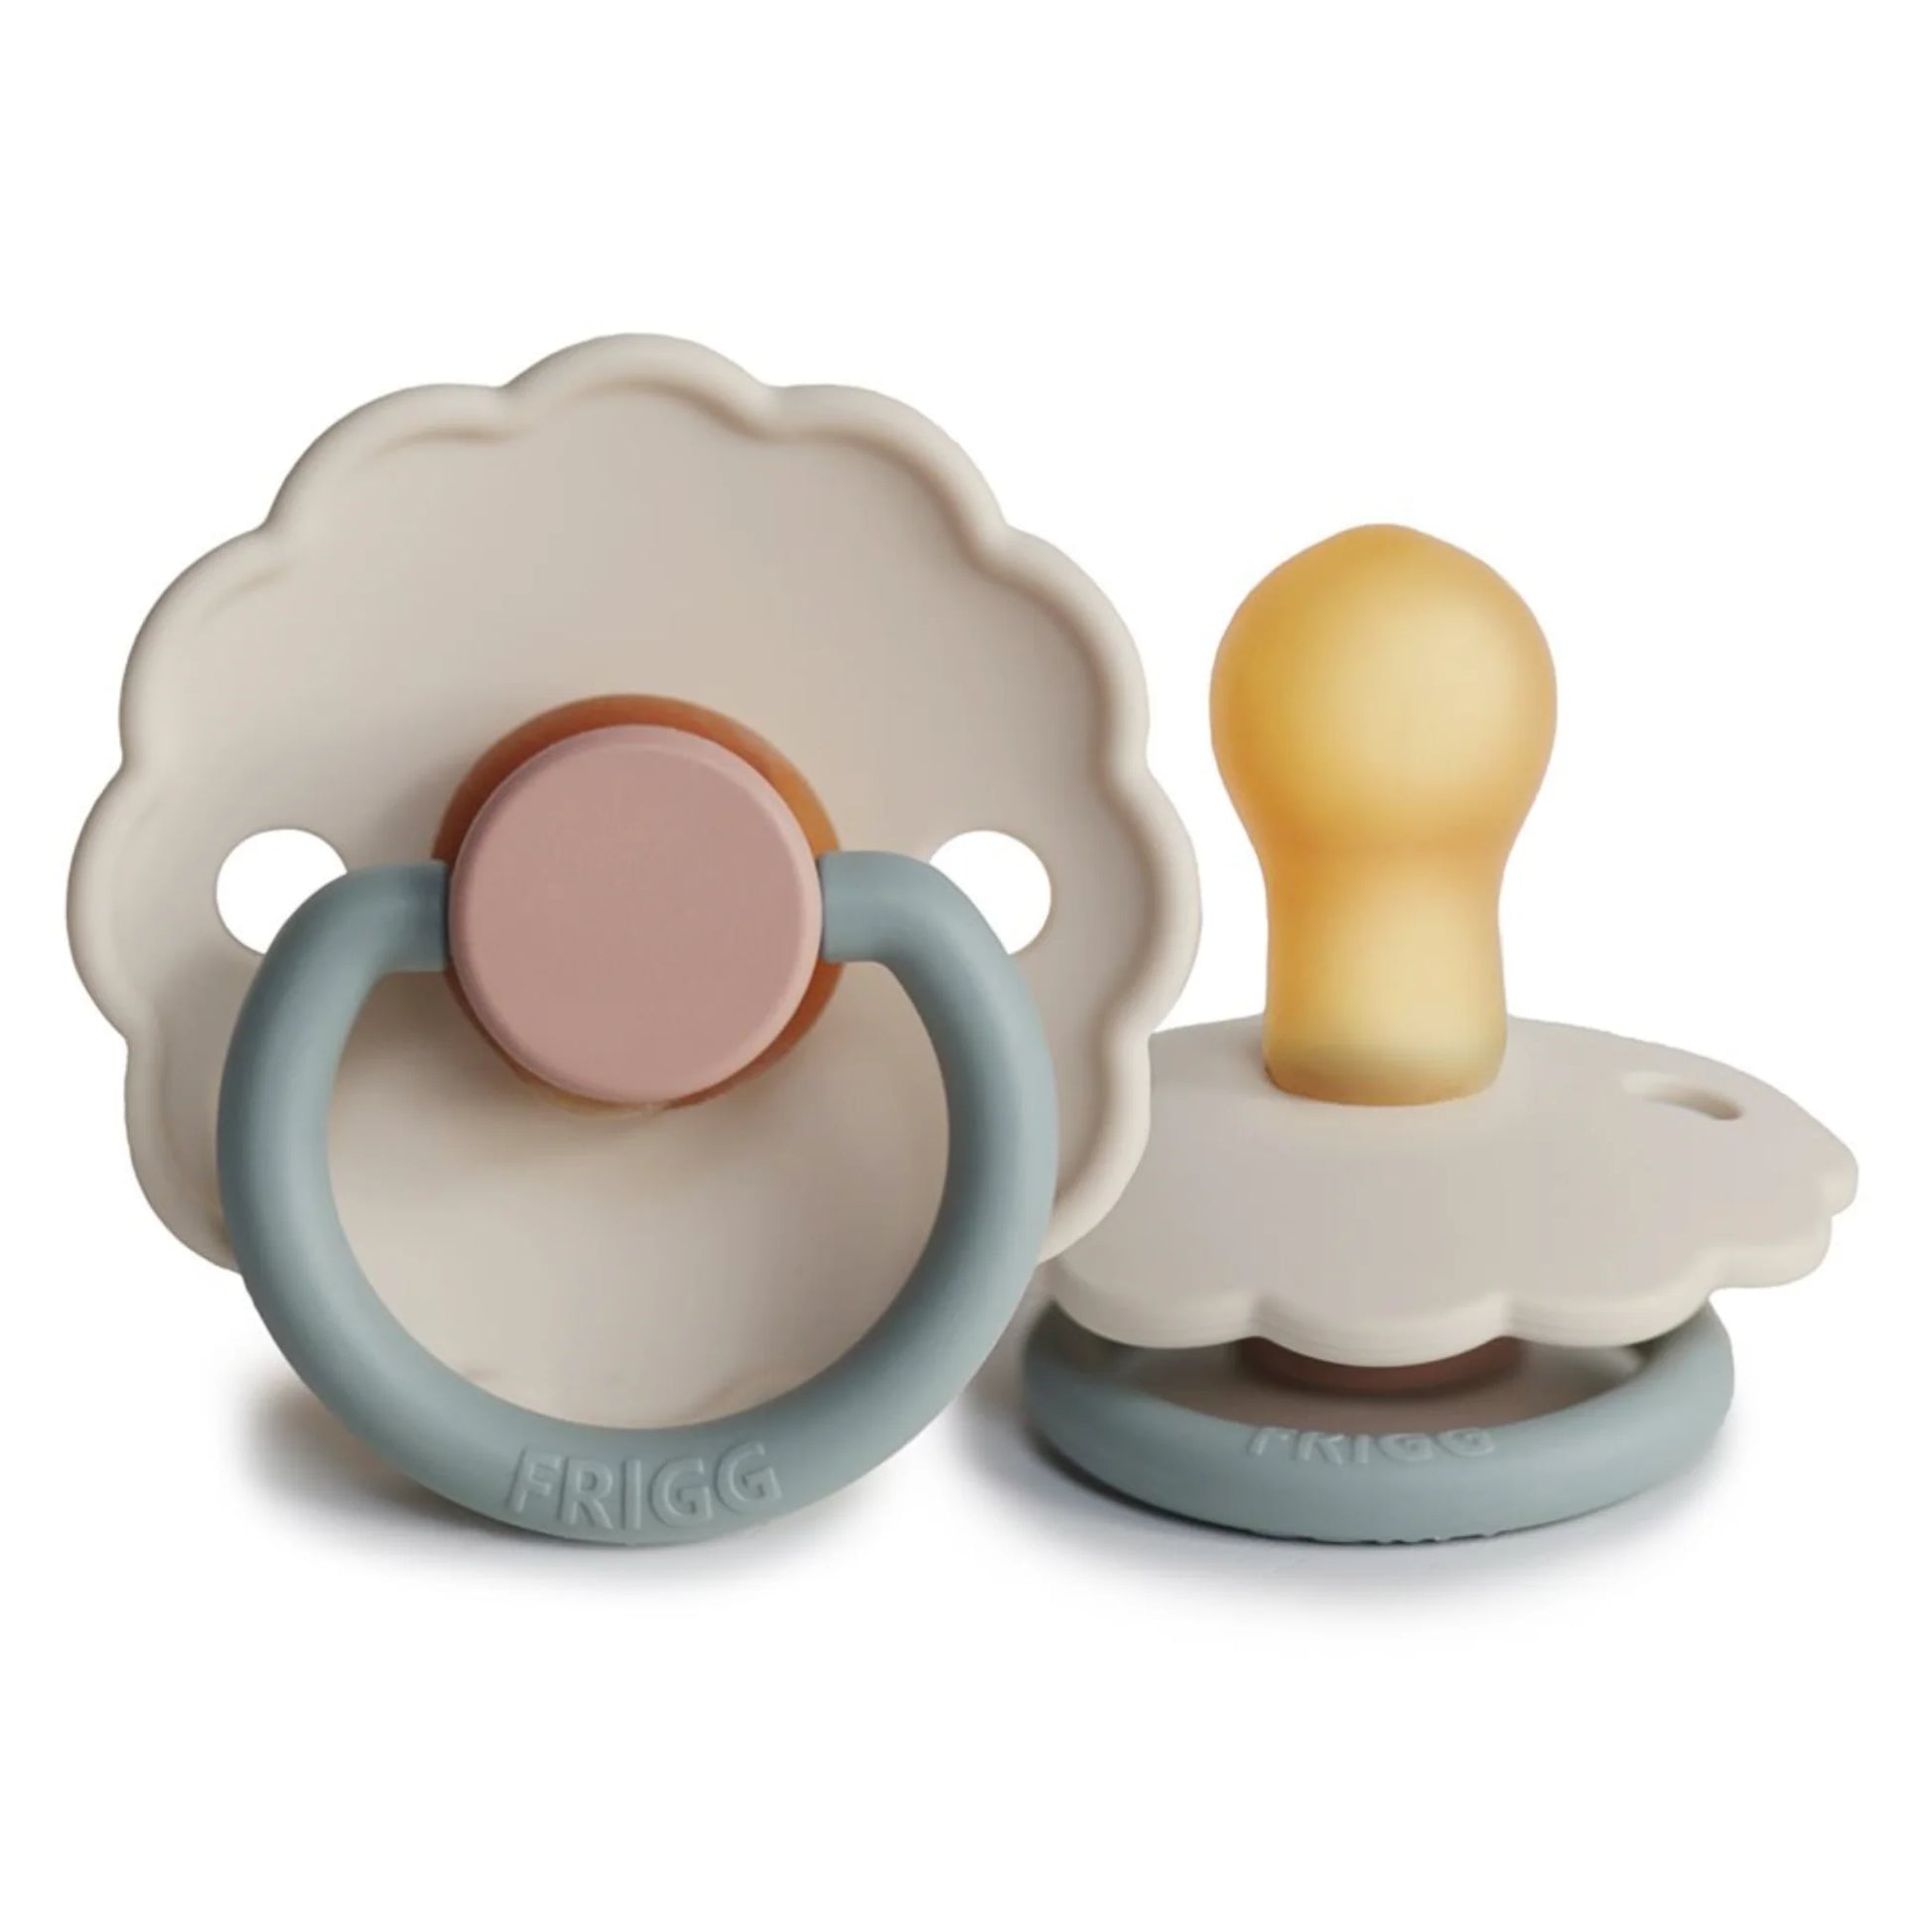 Frigg Pacifier Cotton Candy